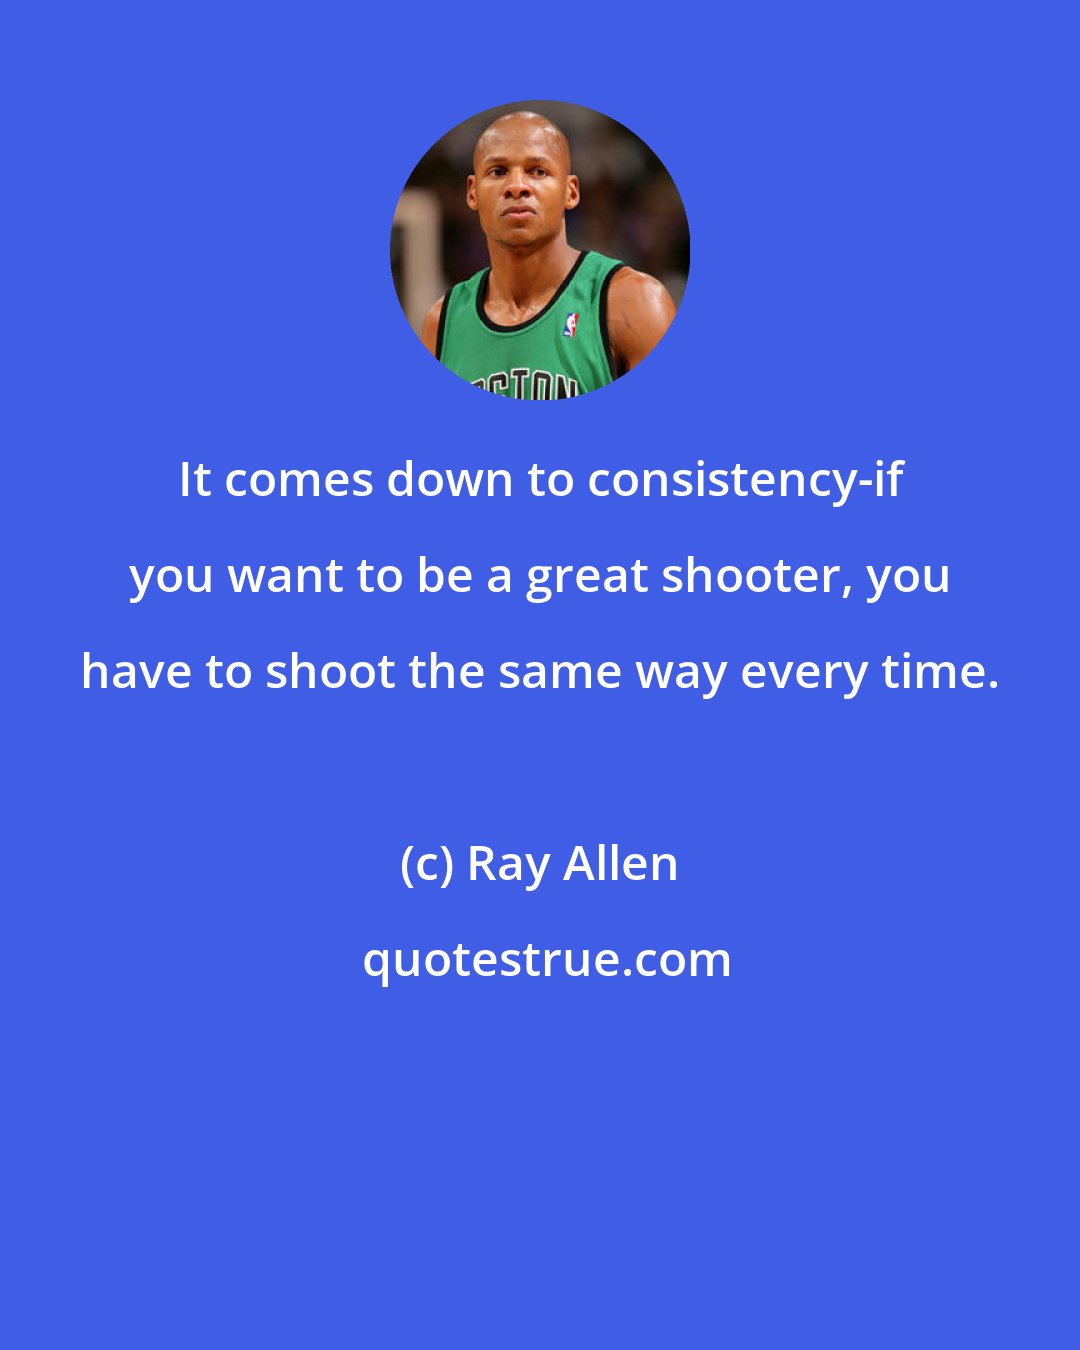 Ray Allen: It comes down to consistency-if you want to be a great shooter, you have to shoot the same way every time.